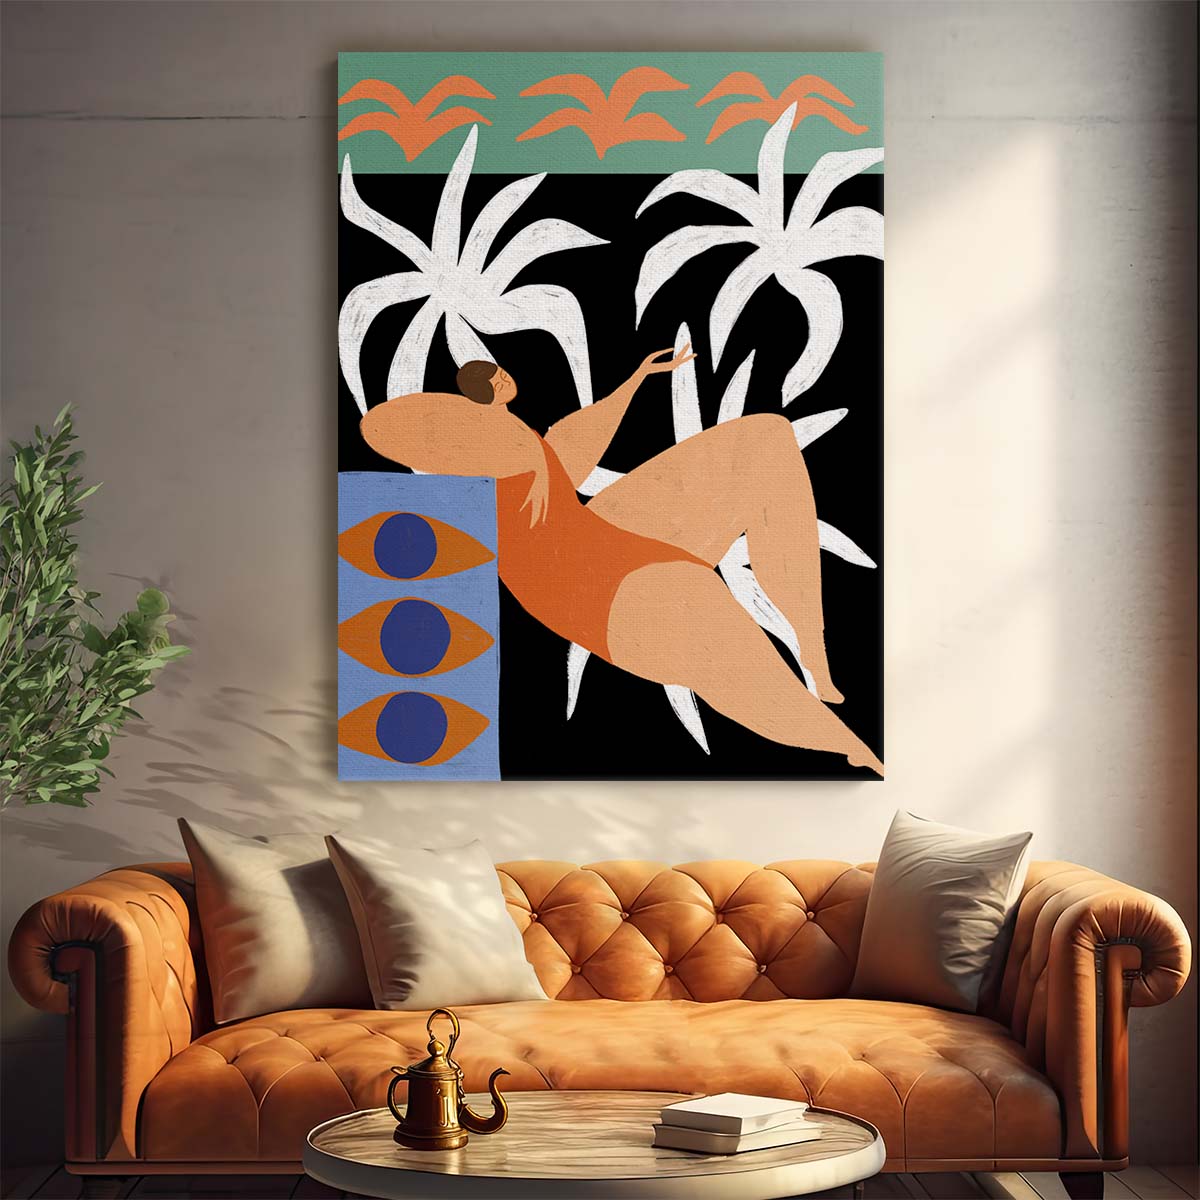 Colorful Abstract Figurative Illustration of Relaxing Woman Amidst Tropical Botanicals by Luxuriance Designs, made in USA